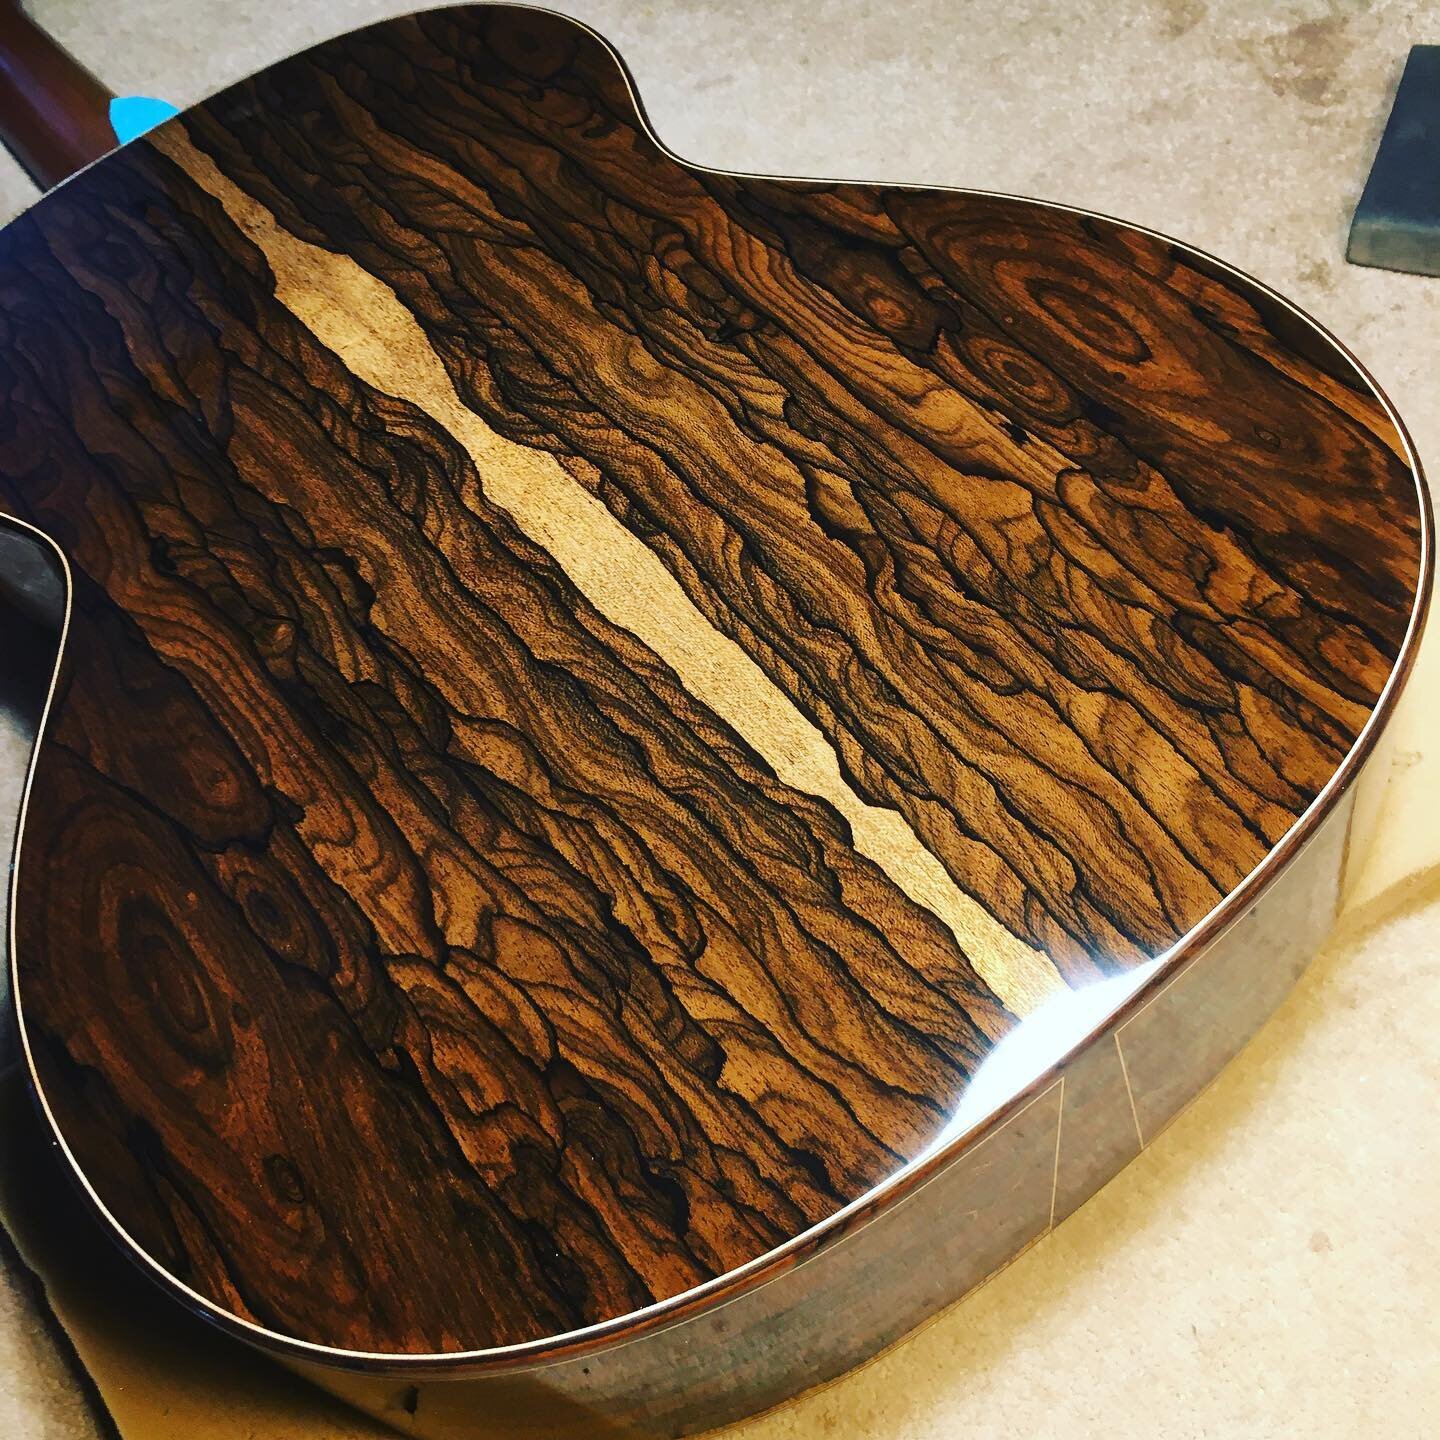 Got the Zircote classical all shined up and ready to go!
This wood was spectacular to work with. It&rsquo;s always an honour to get to turn special pieces into an instrument that will sing for years to come. 
.
.
.
#guitar #music #luthier #luthery #l